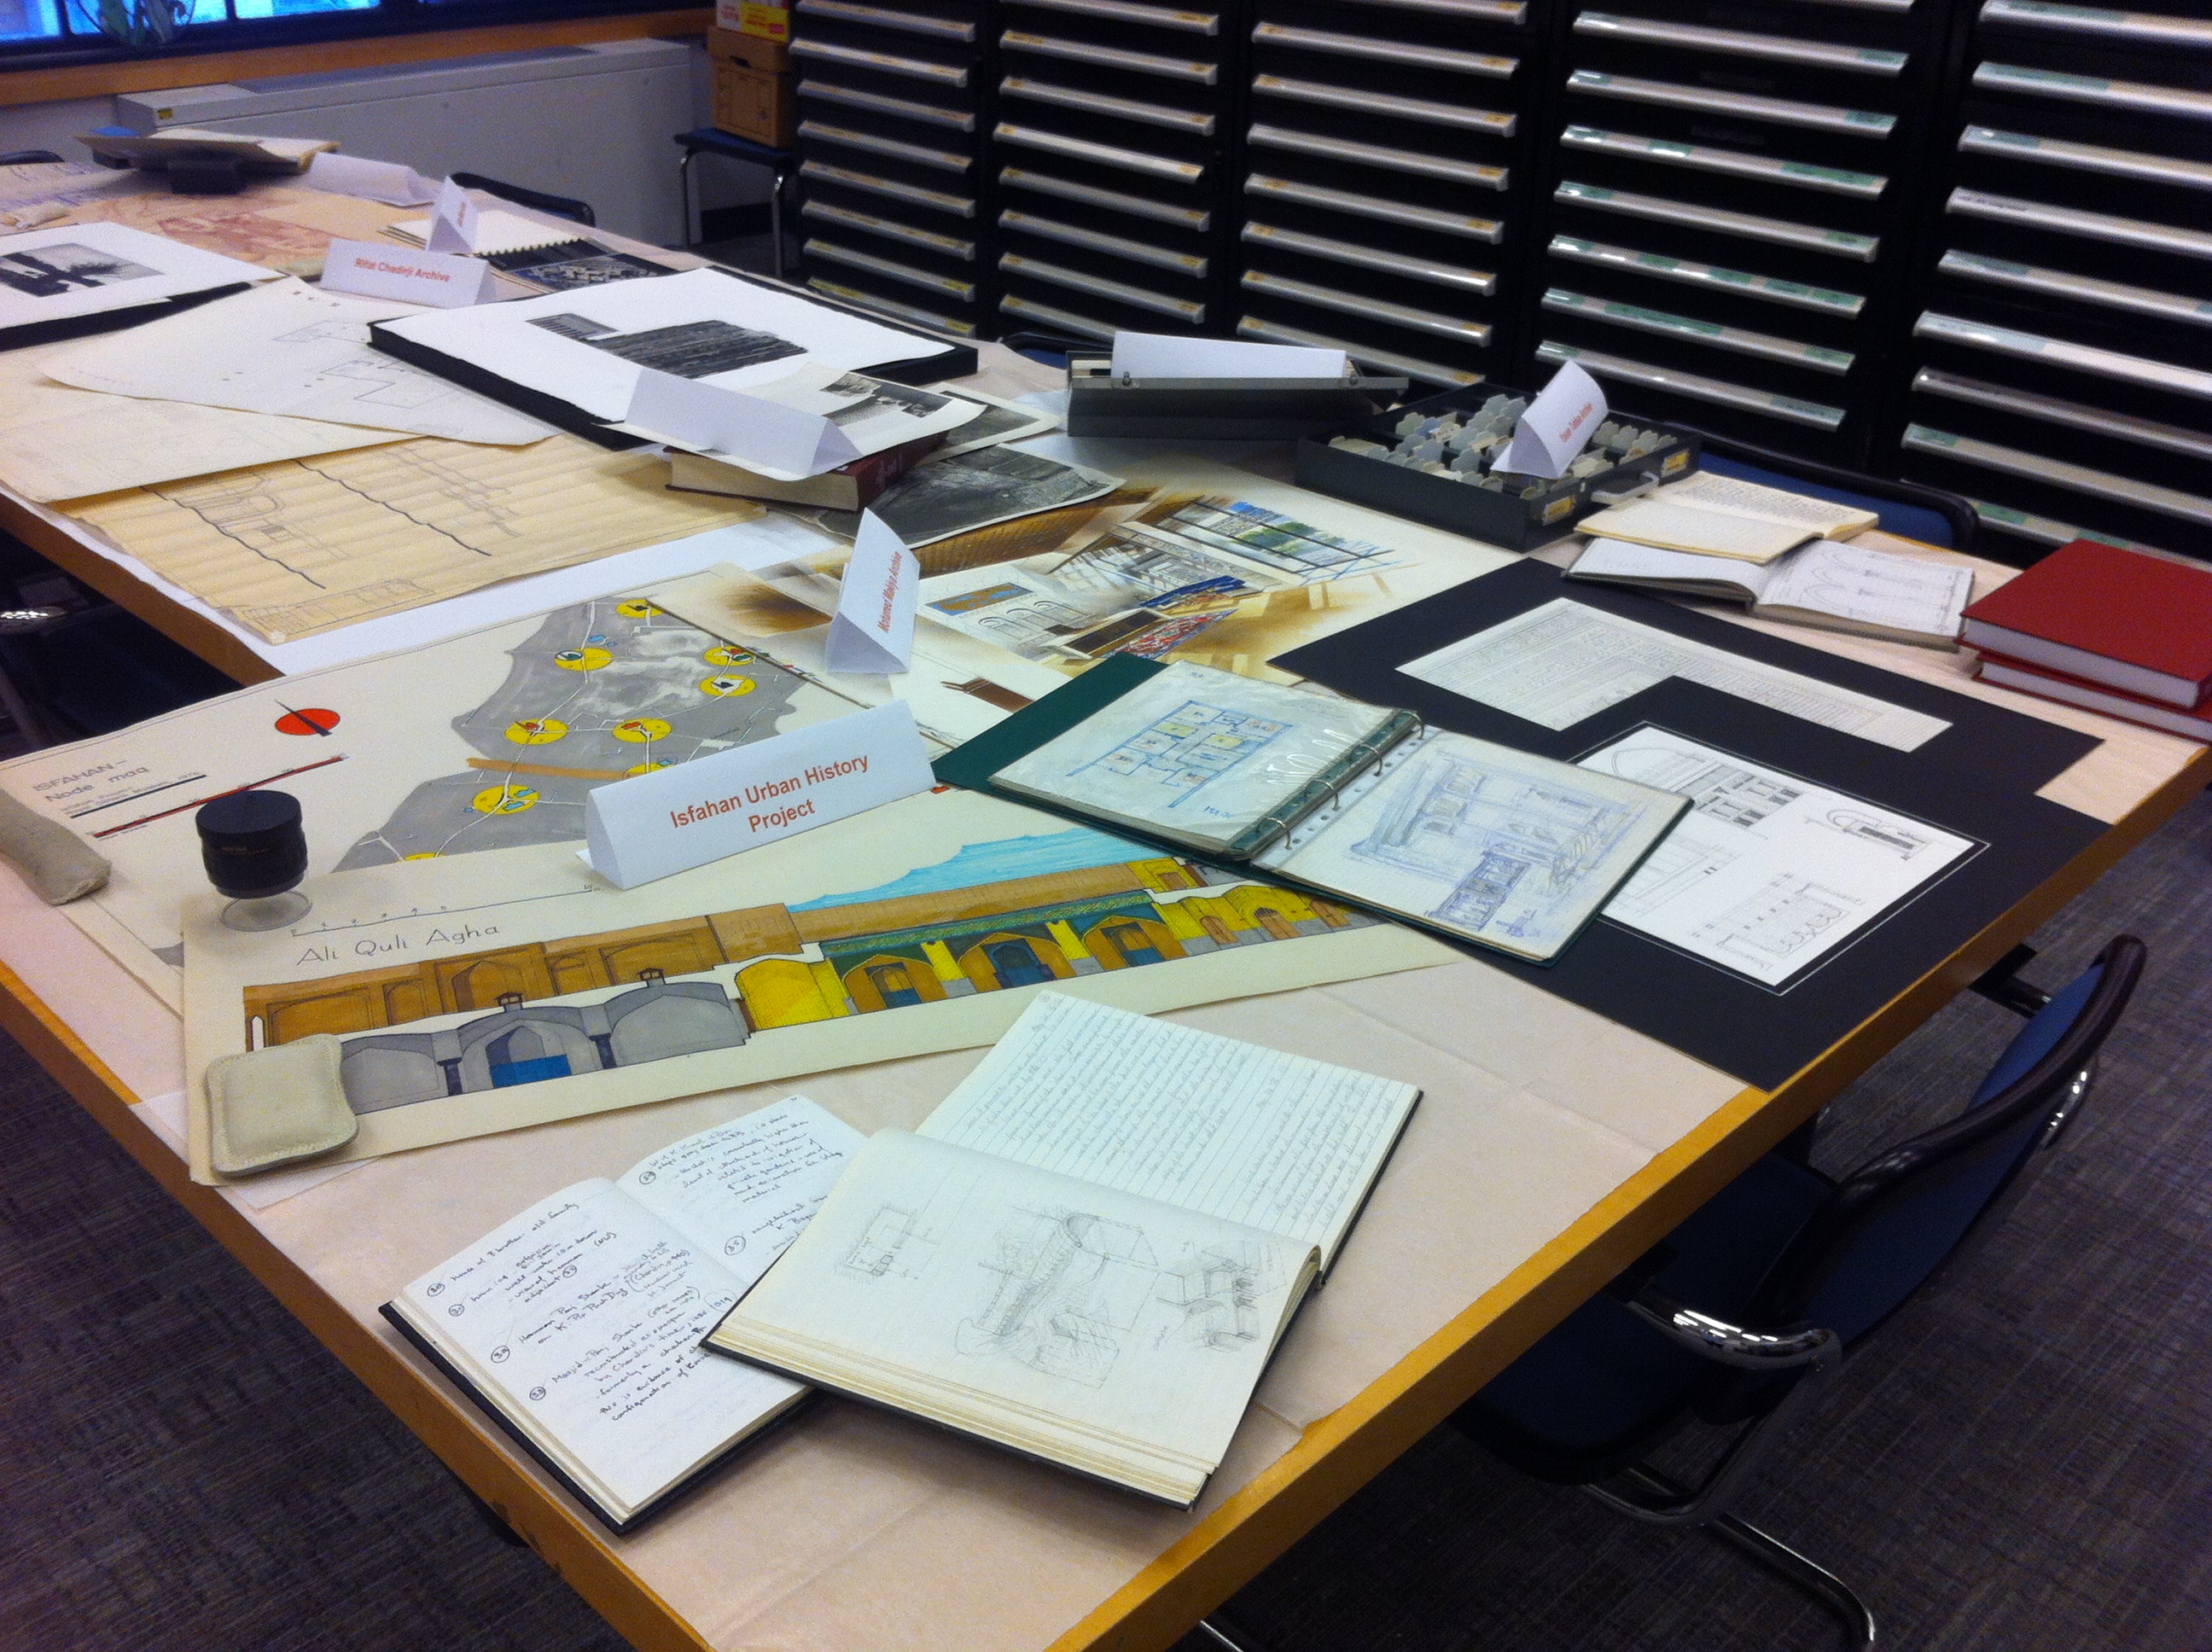 Archives on display at the Aga Khan Documentation Center at MIT Libraries